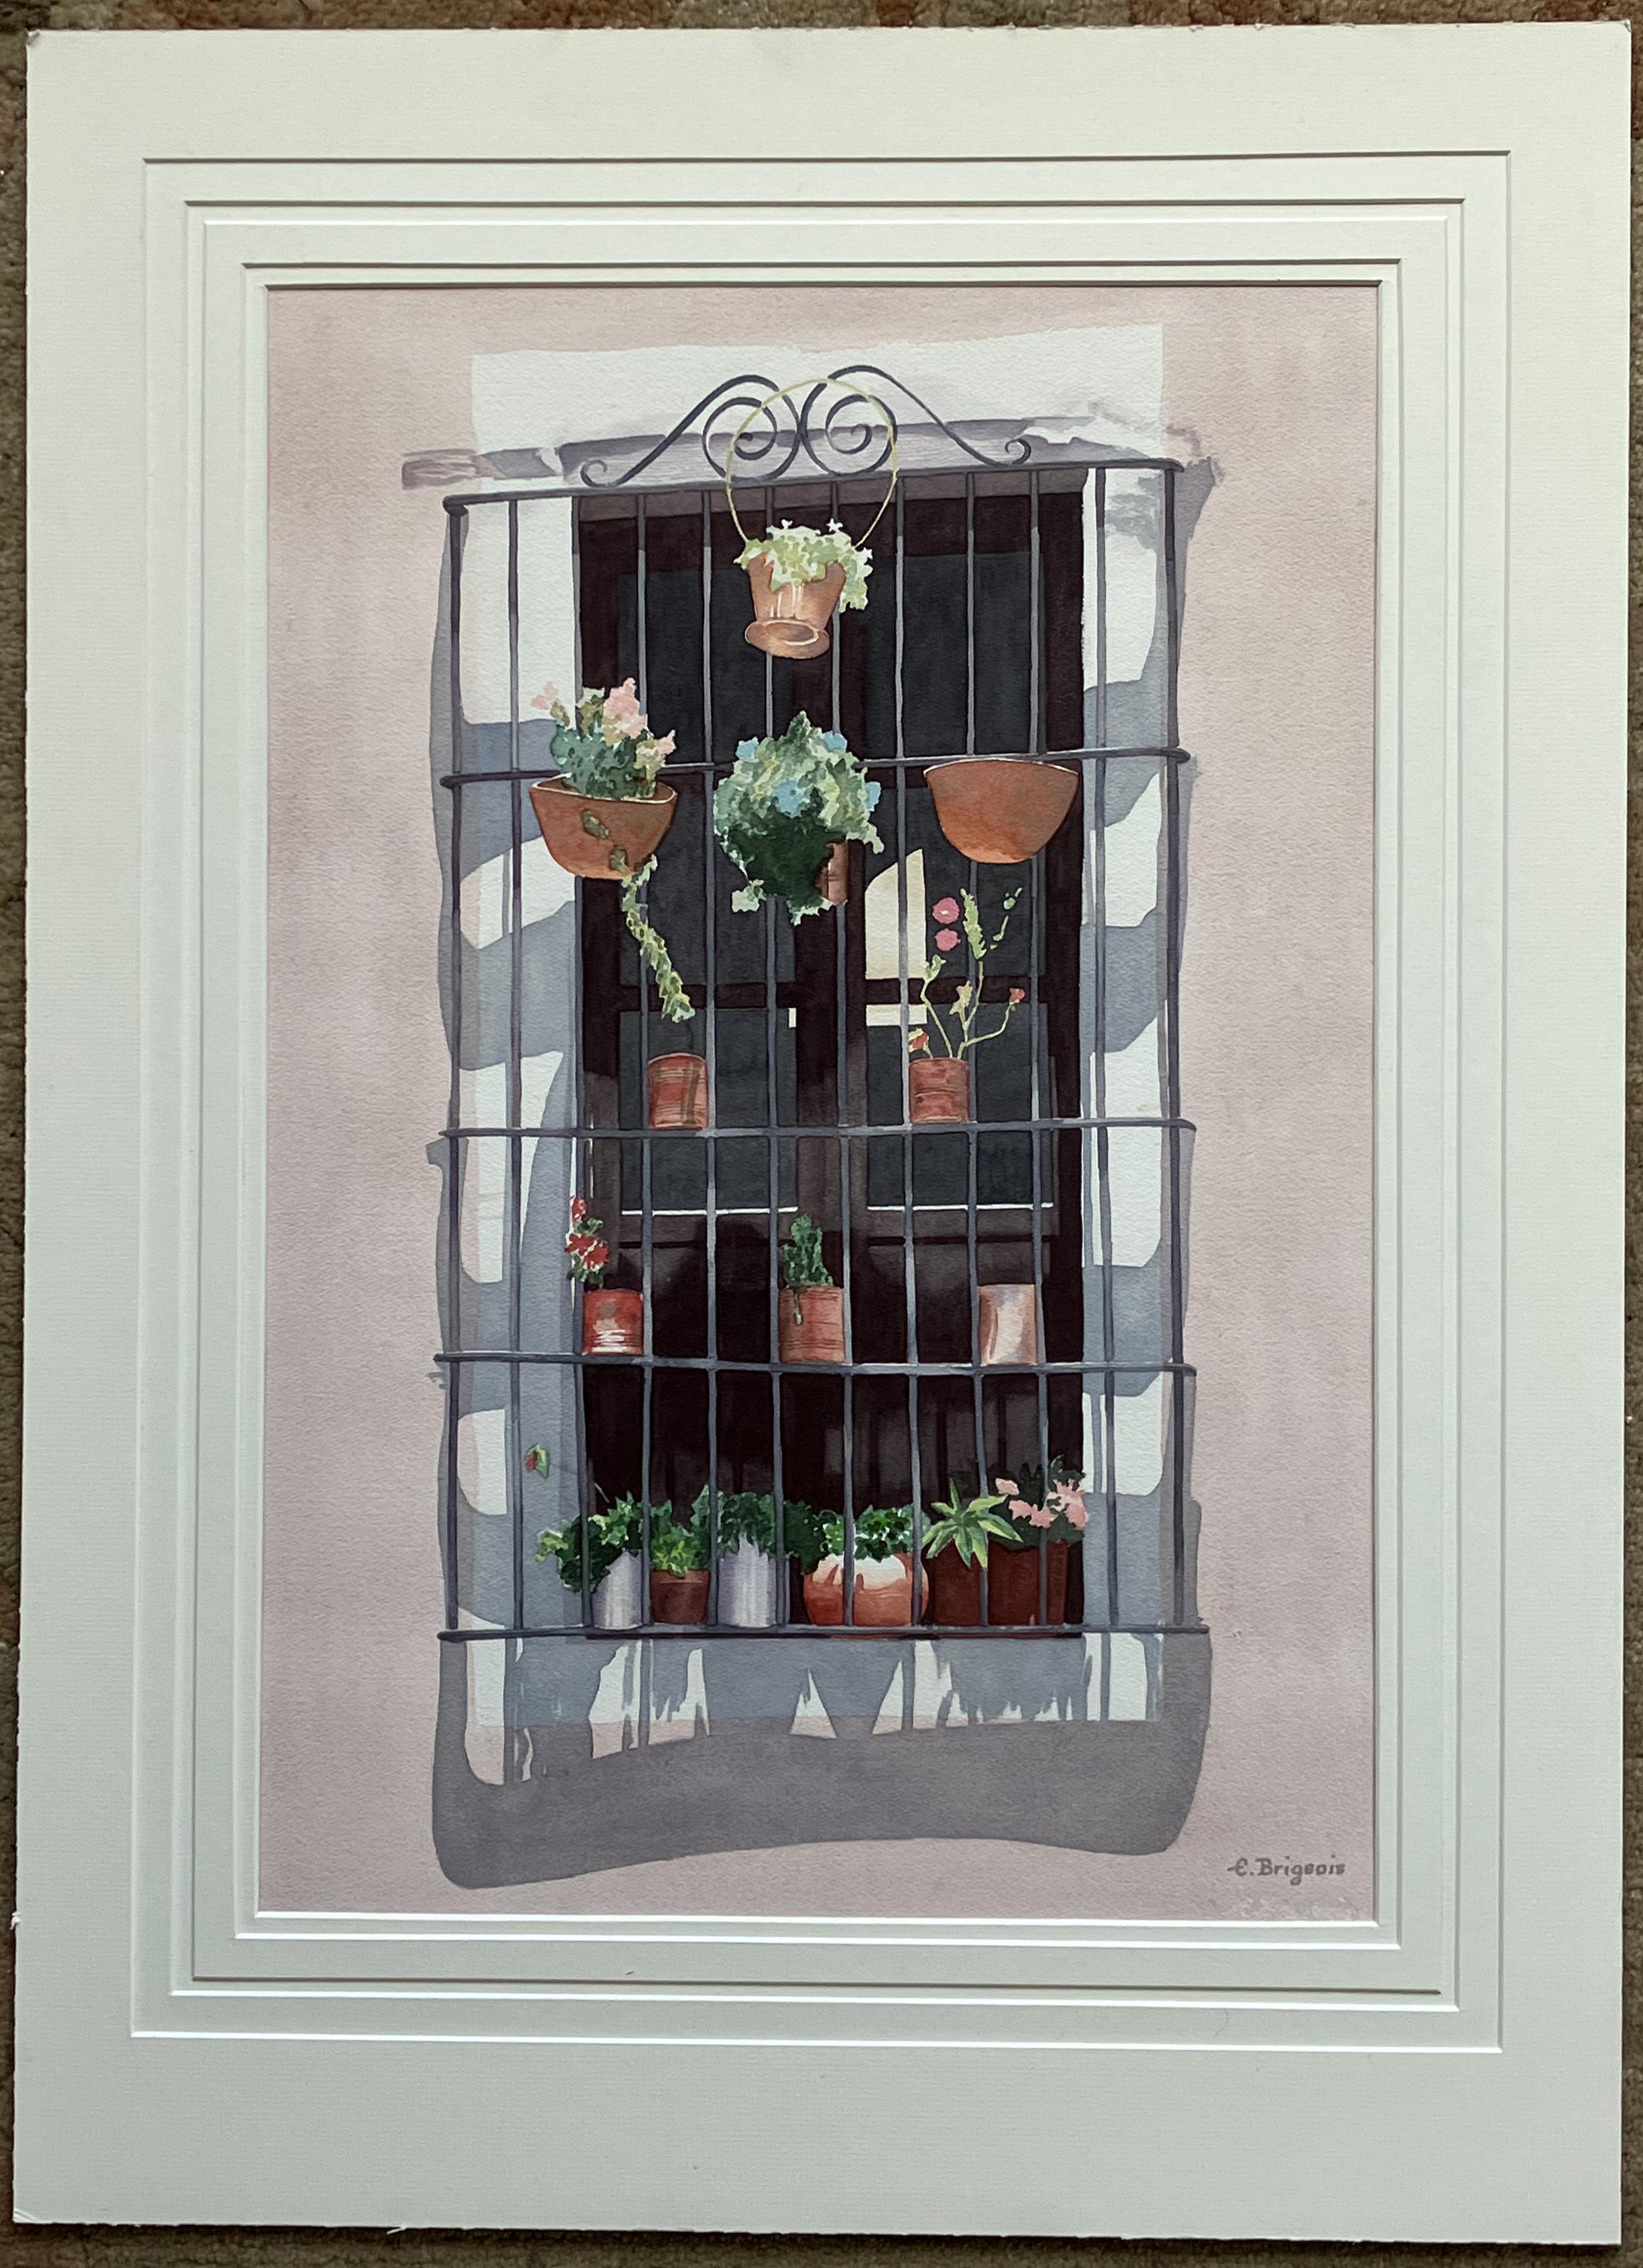 Guanajuato Window - Painting by Evelyne Brigeois